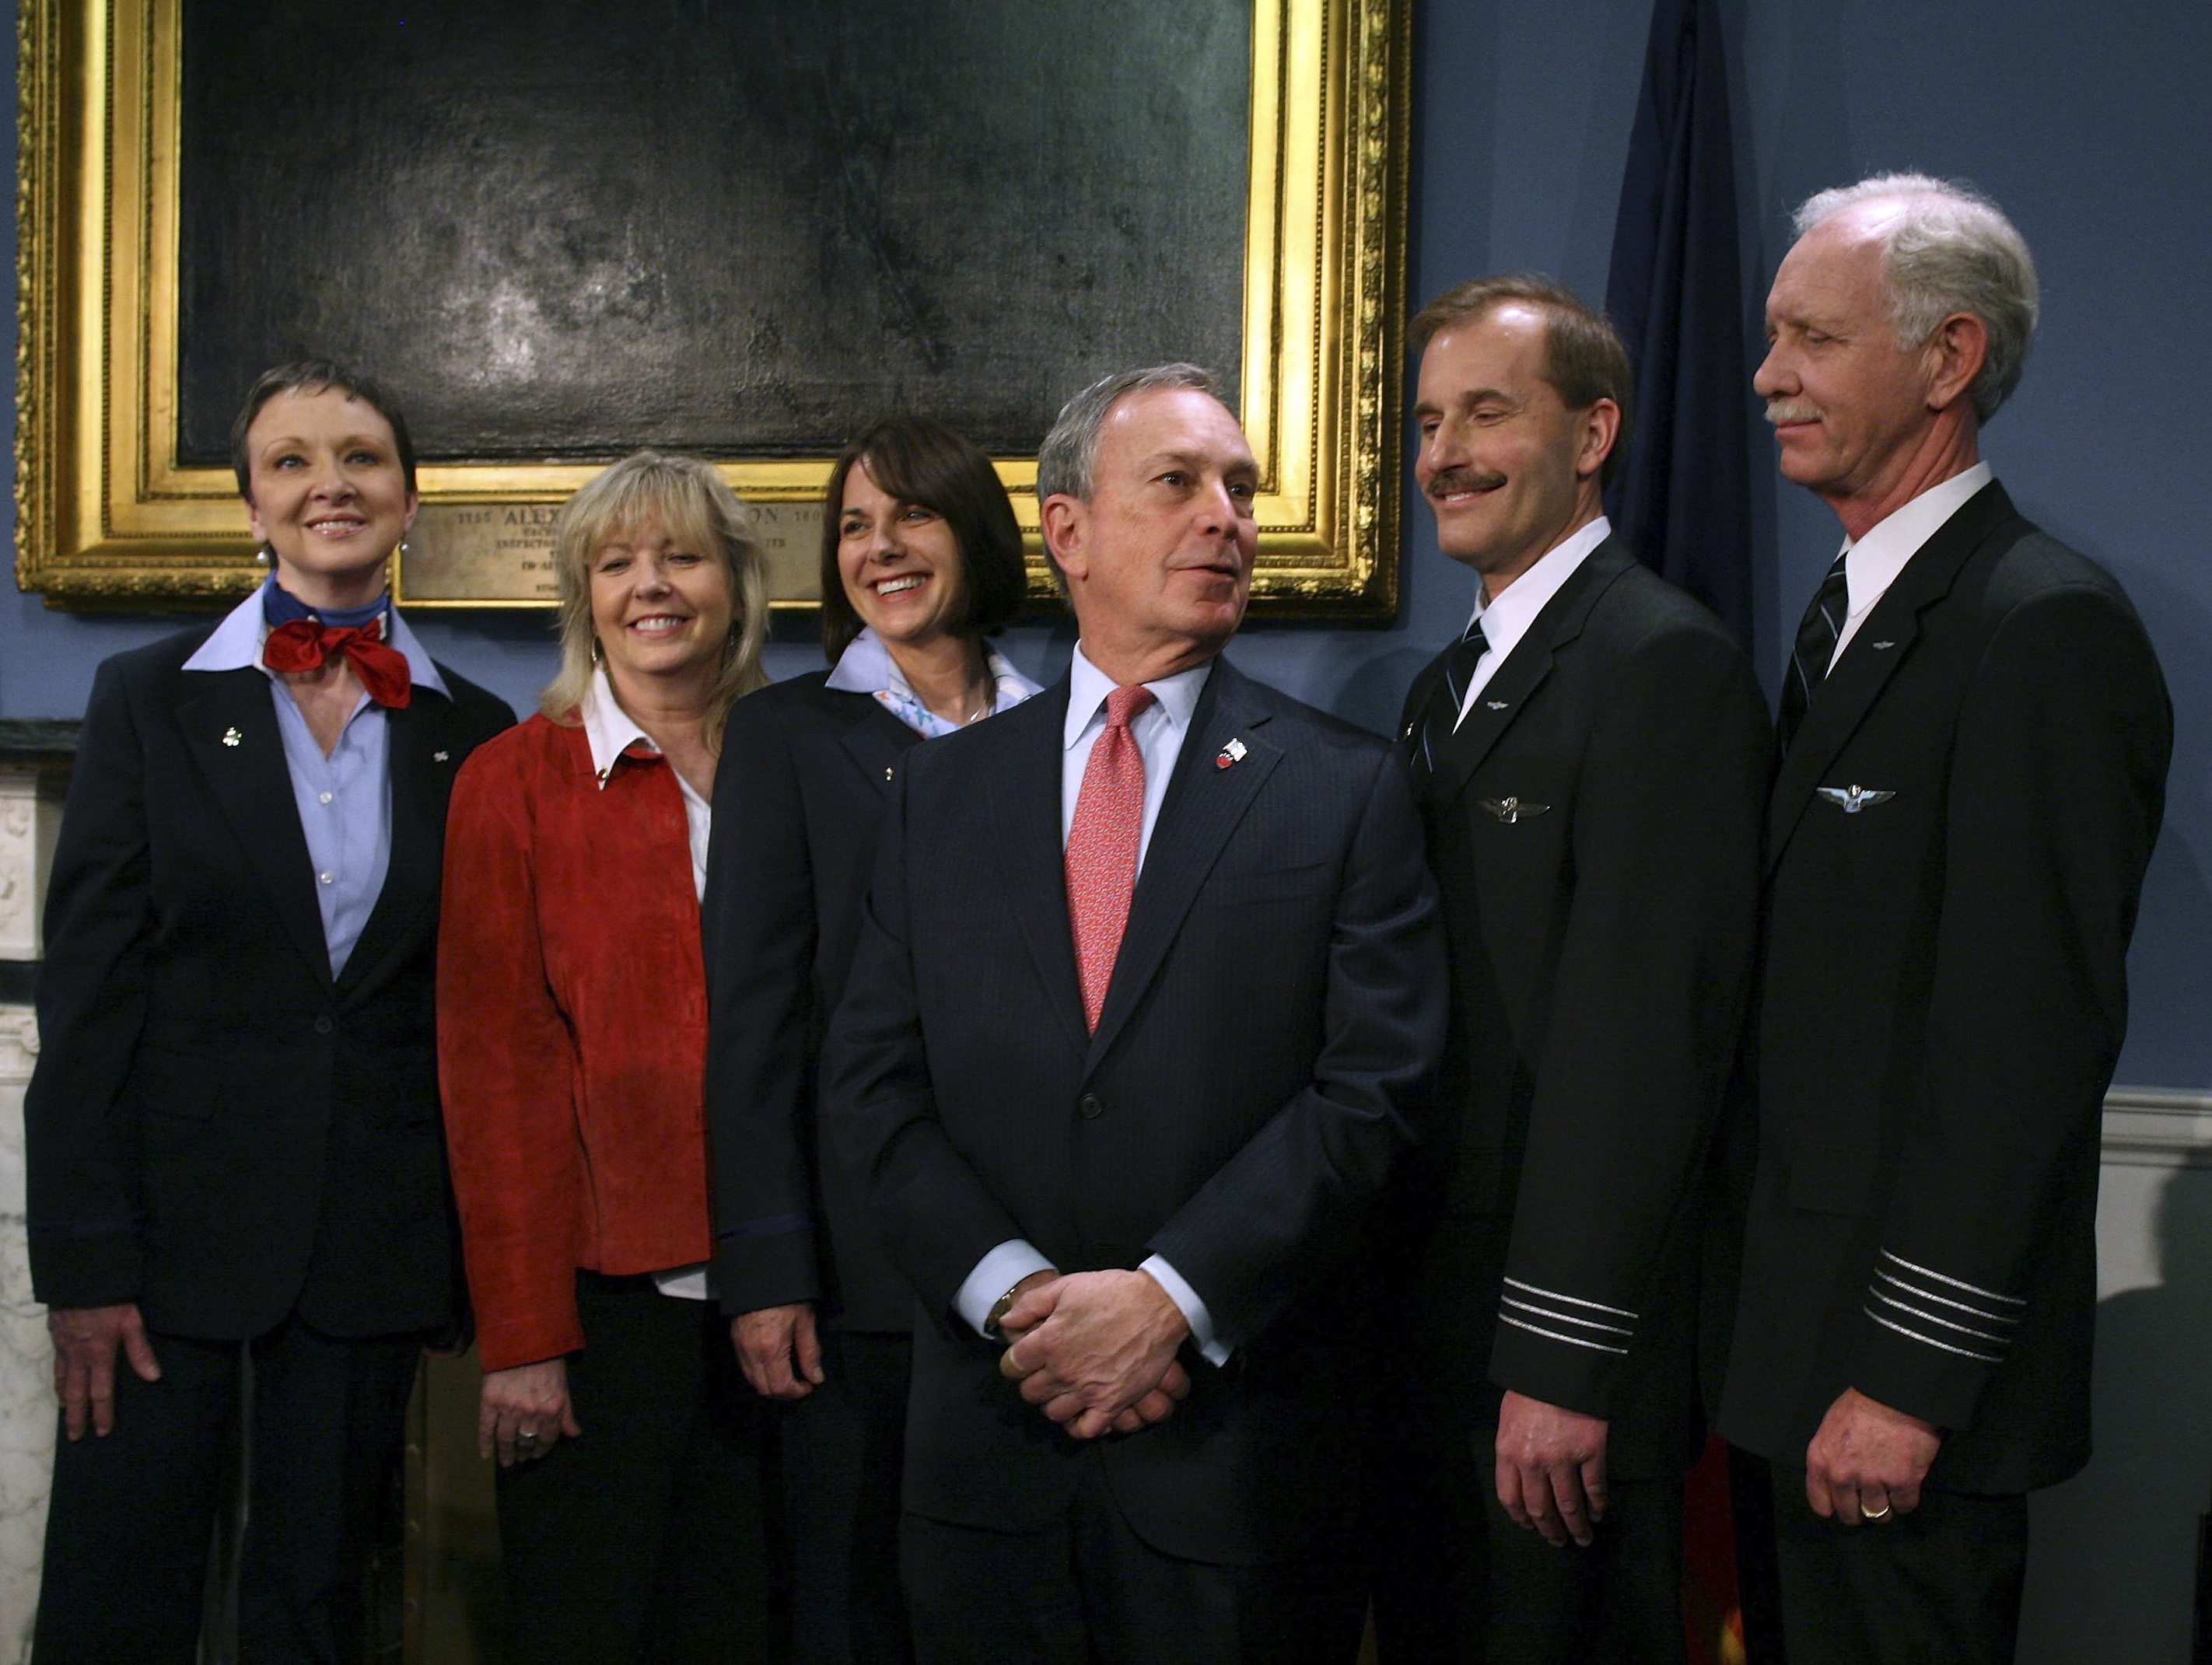 New York Mayor Bloomberg poses with the crew of US Airways Flight 1549 after receiving their 'Keys to the City' at City Hall